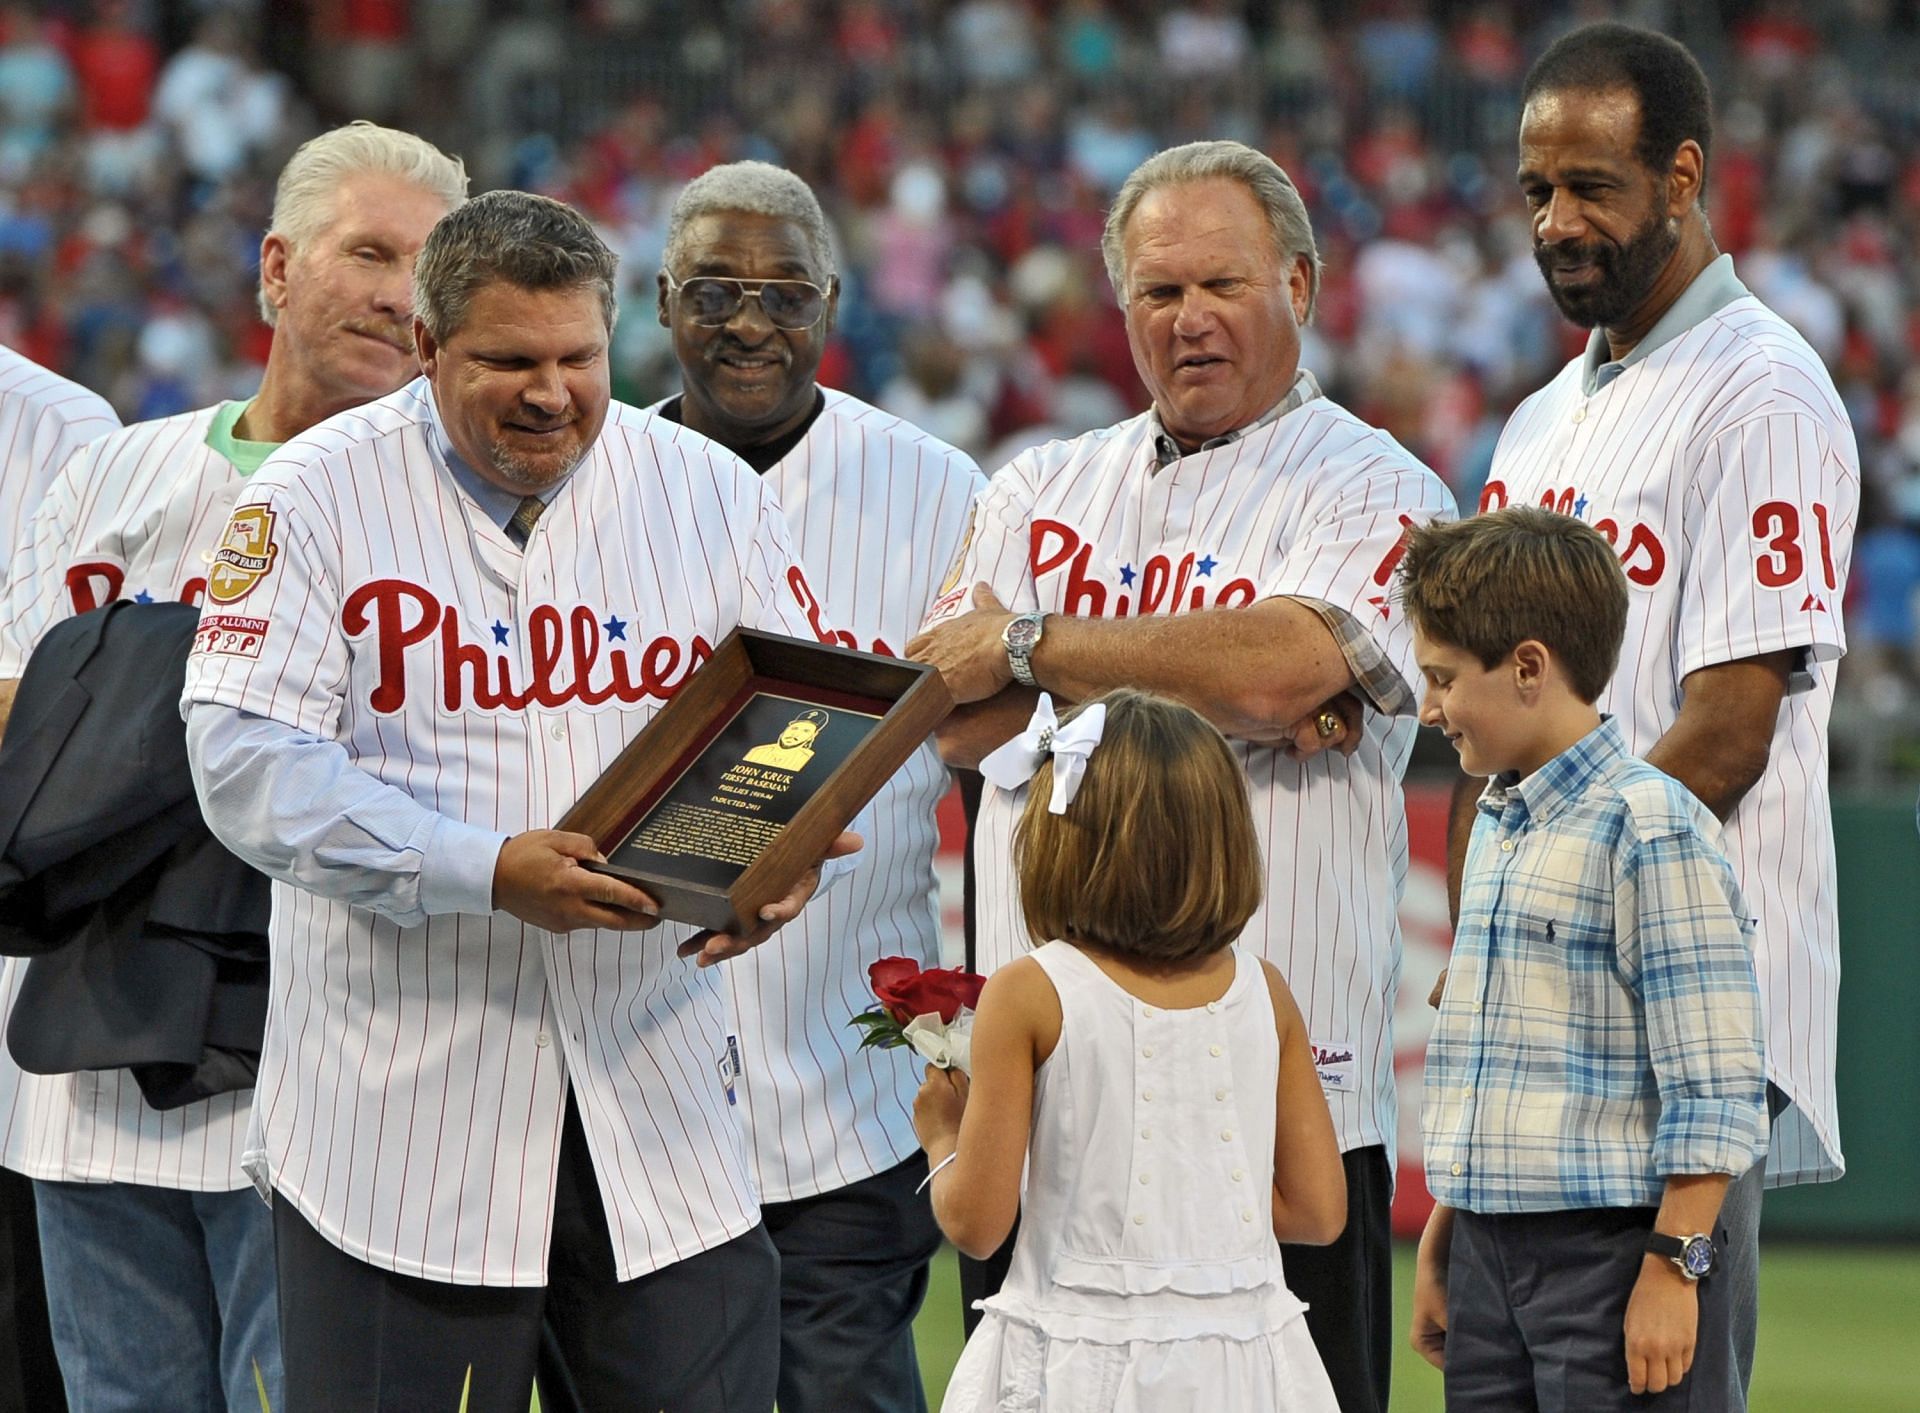 Philadelphia Phillies Wall of Fame inductee John Kruk is presented a plaque by his children Kiera (L) and Kyle (R) at Citizens Bank Park